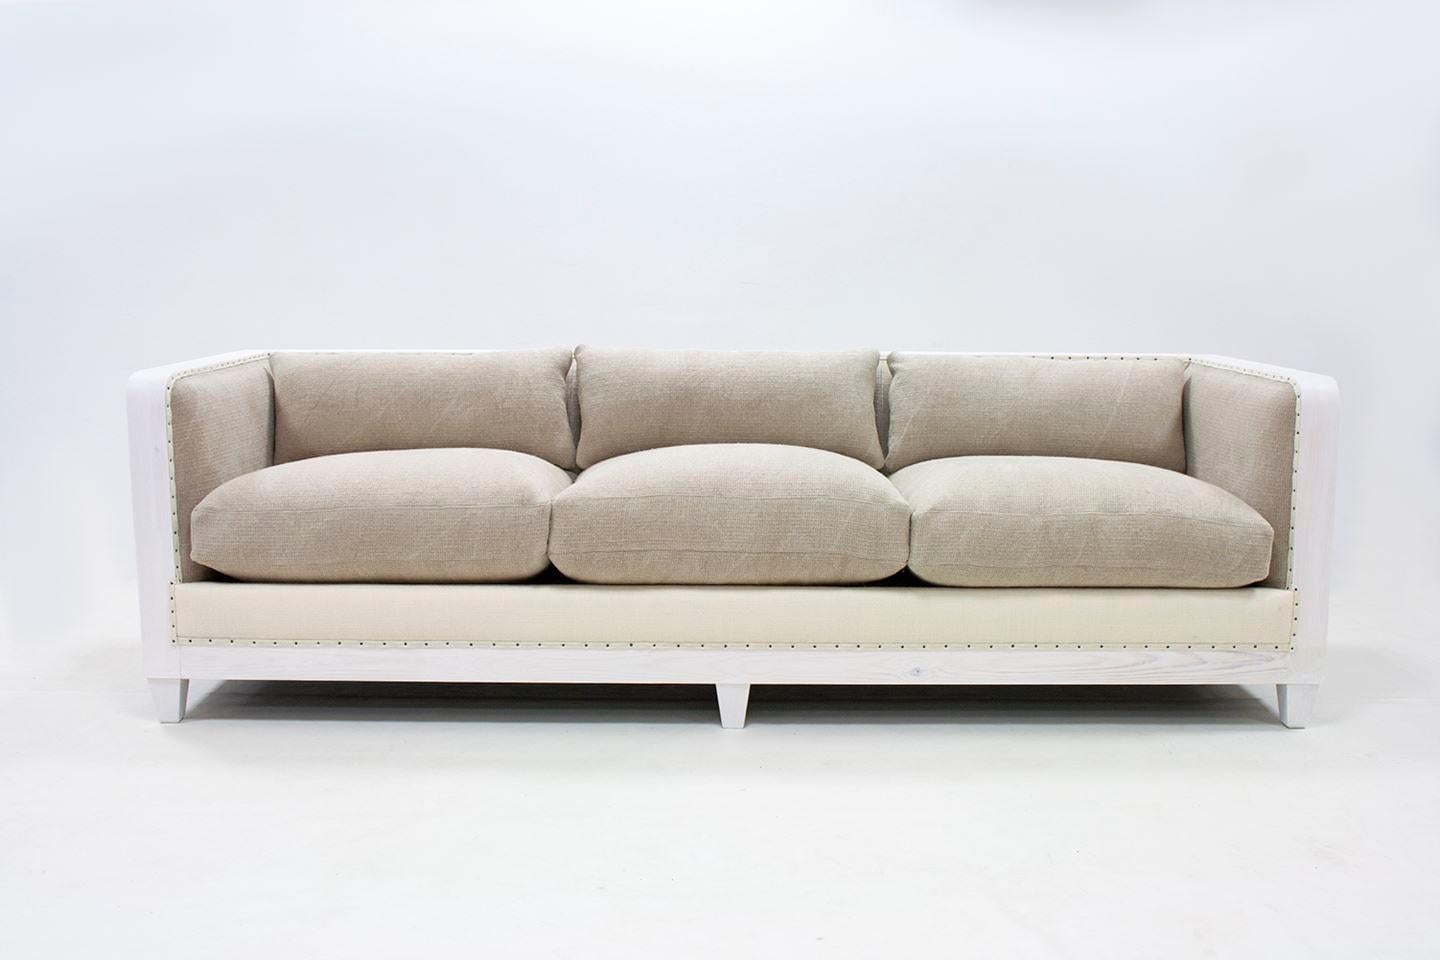 Rustic Contemporary Leather Sofa in Deconstructed Design For Sale